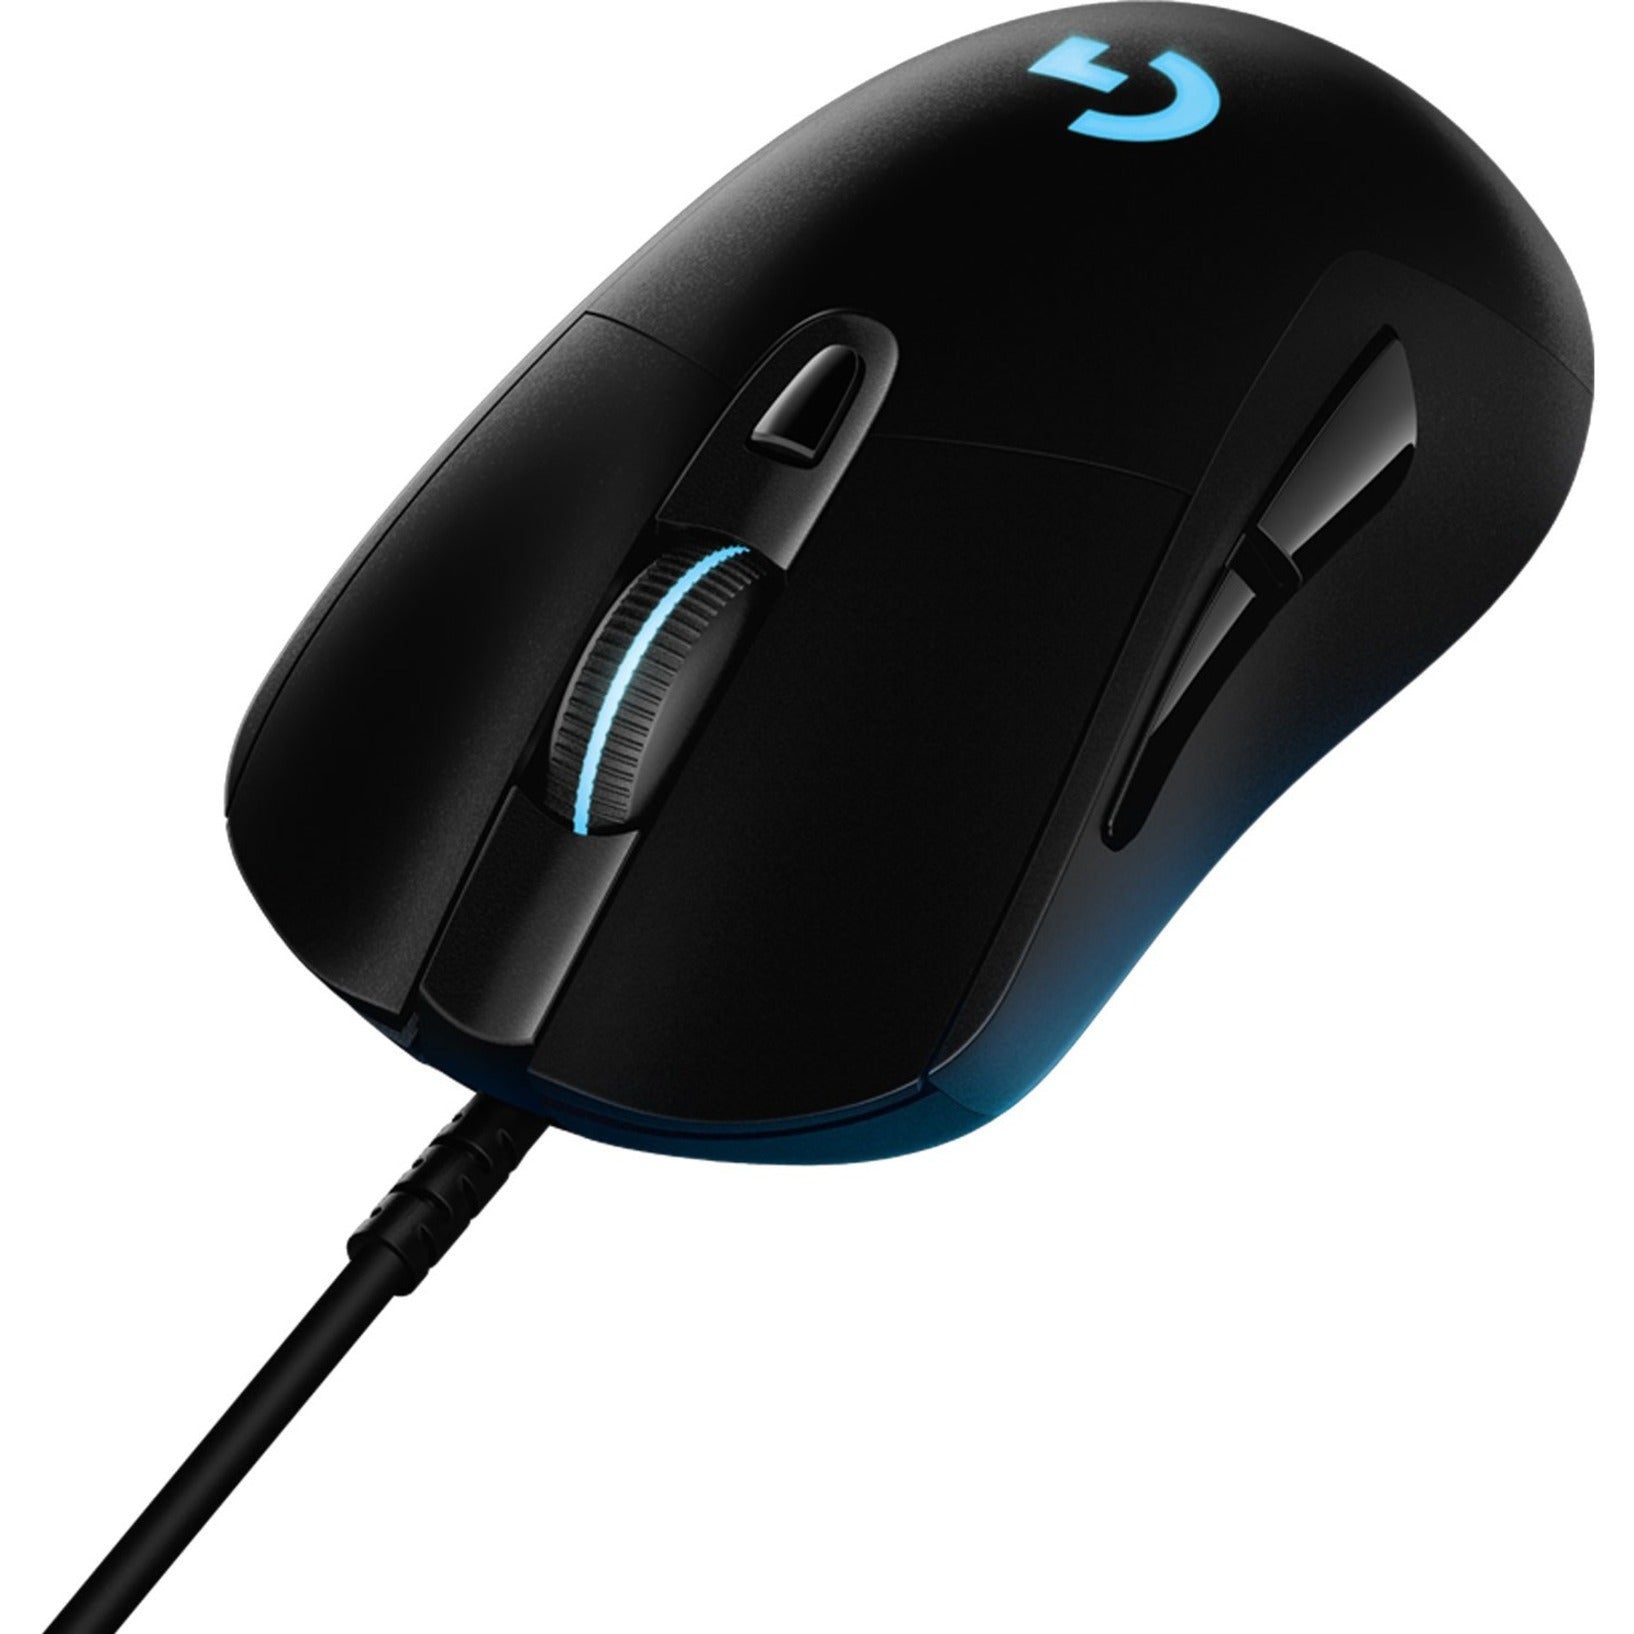 Logitech 910-005630 G403 HERO Gaming Mouse, 6 Buttons, USB Wired, Black